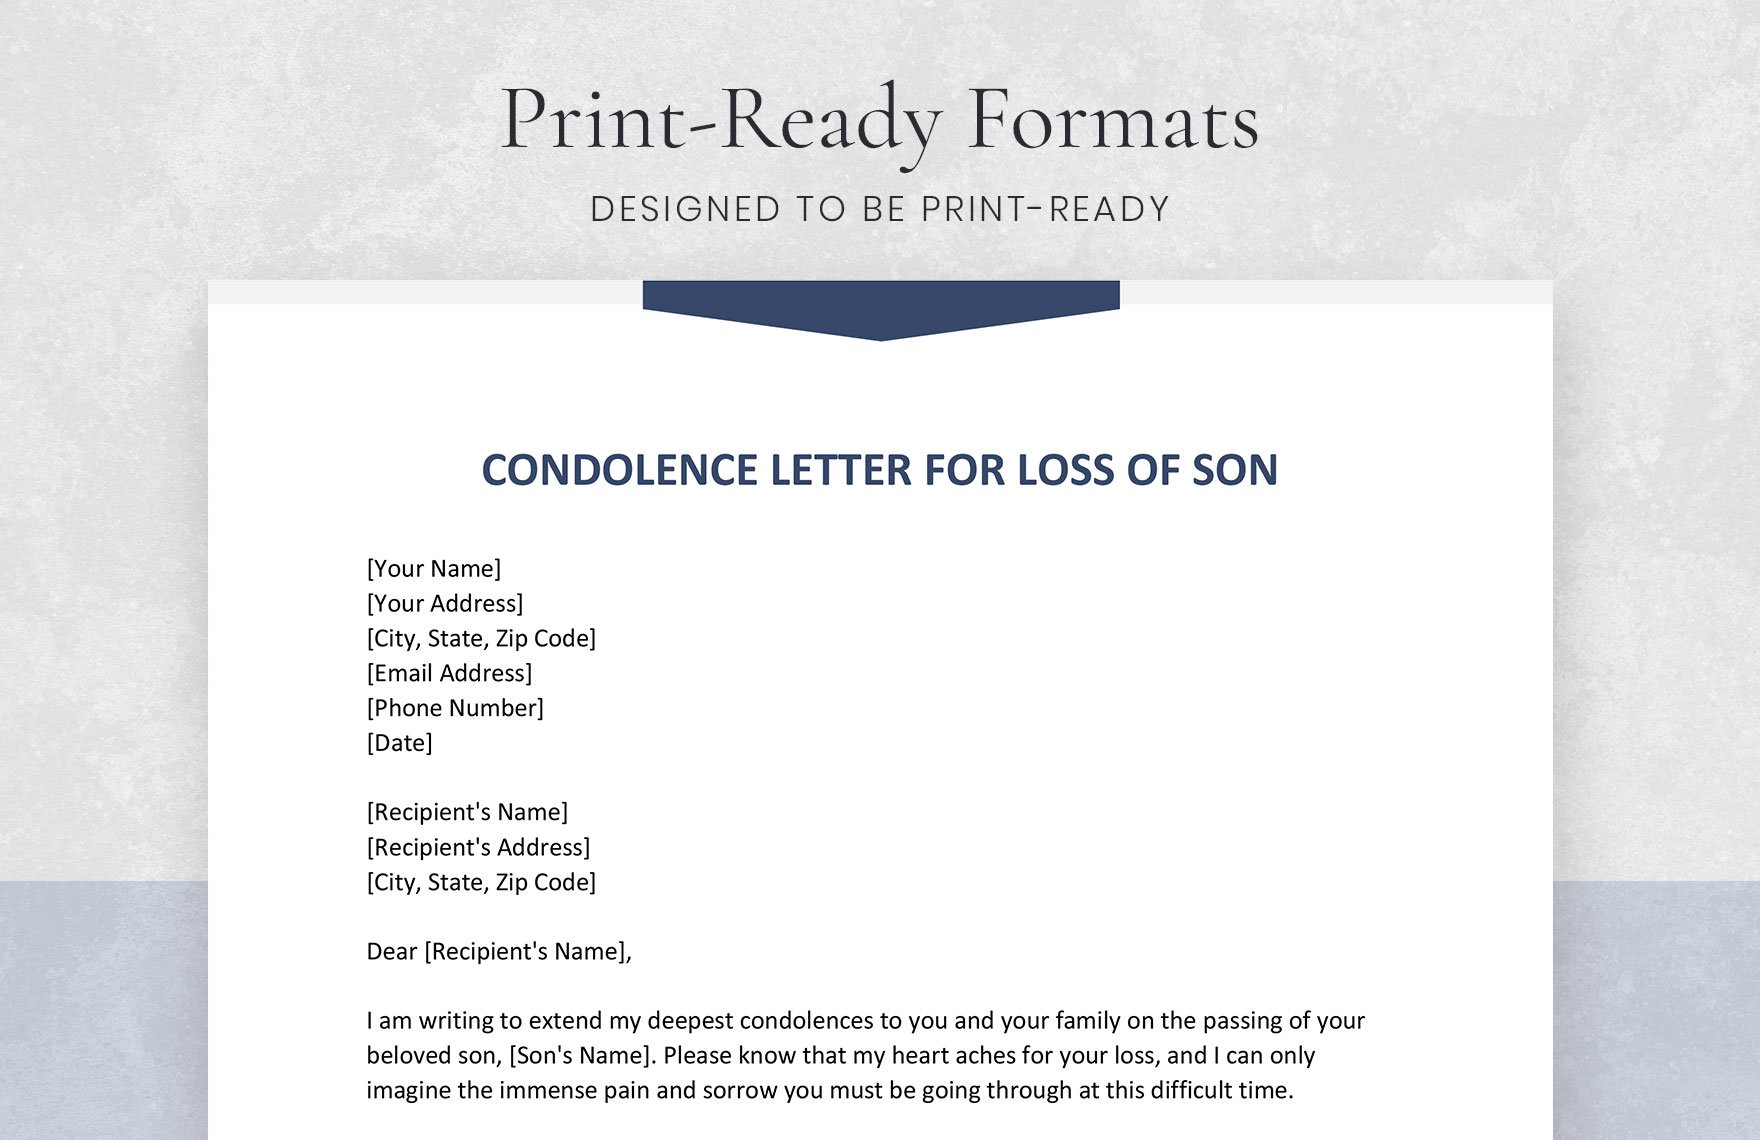 Condolence Letter for Loss of Son